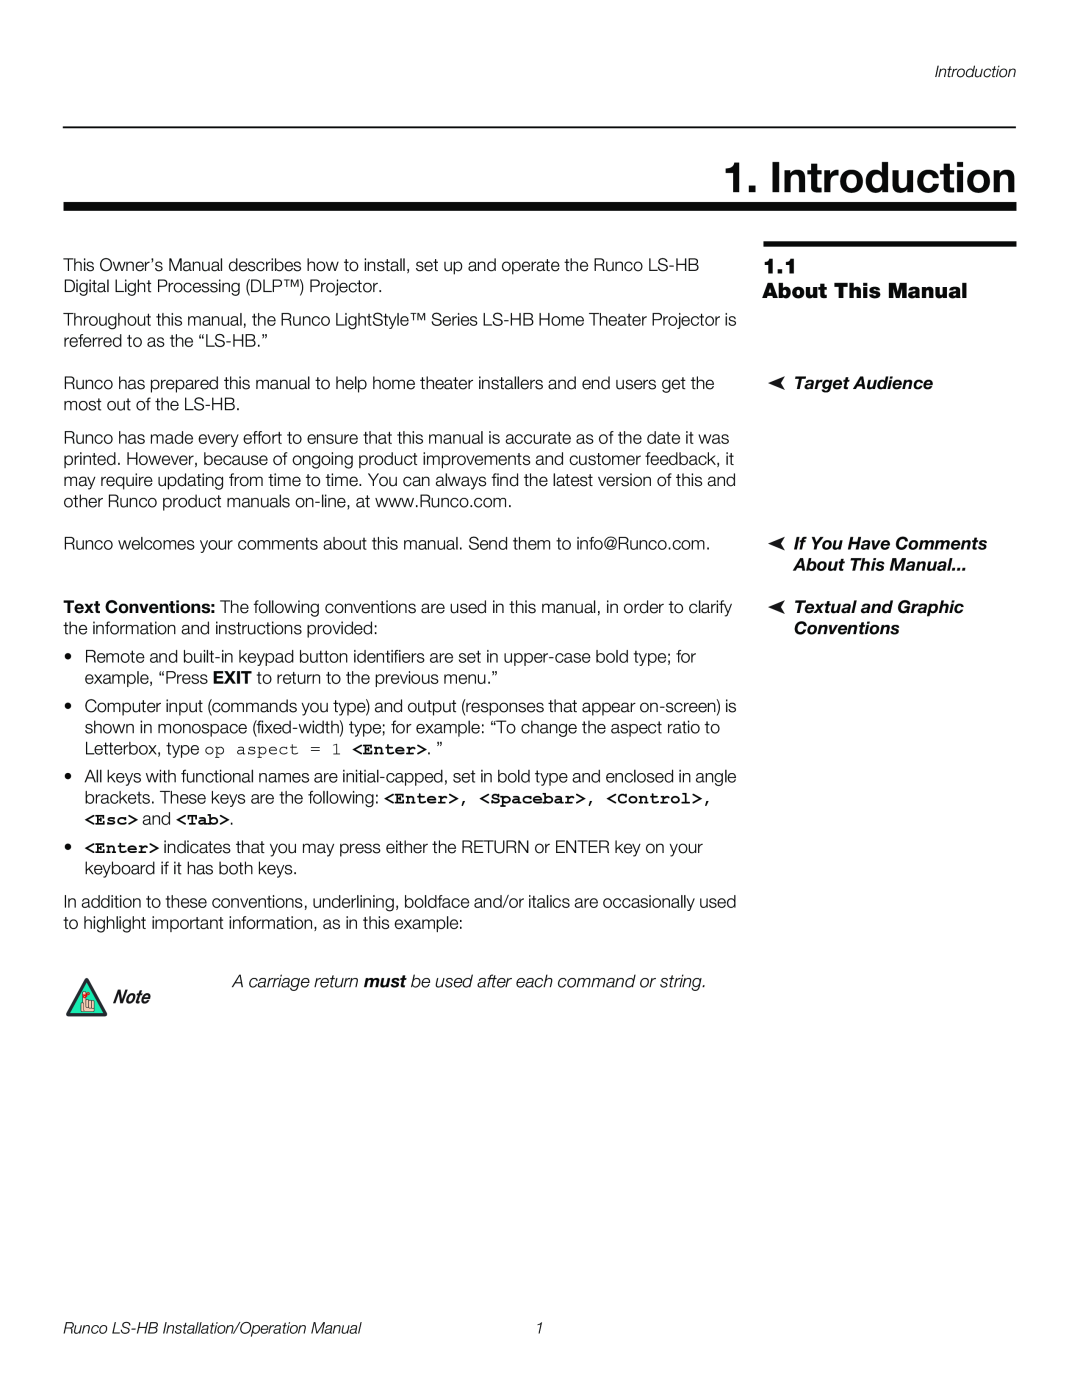 Runco LS-HB Introduction, About This Manual, Target Audience, If You Have Comments, Textual and Graphic, Conventions 